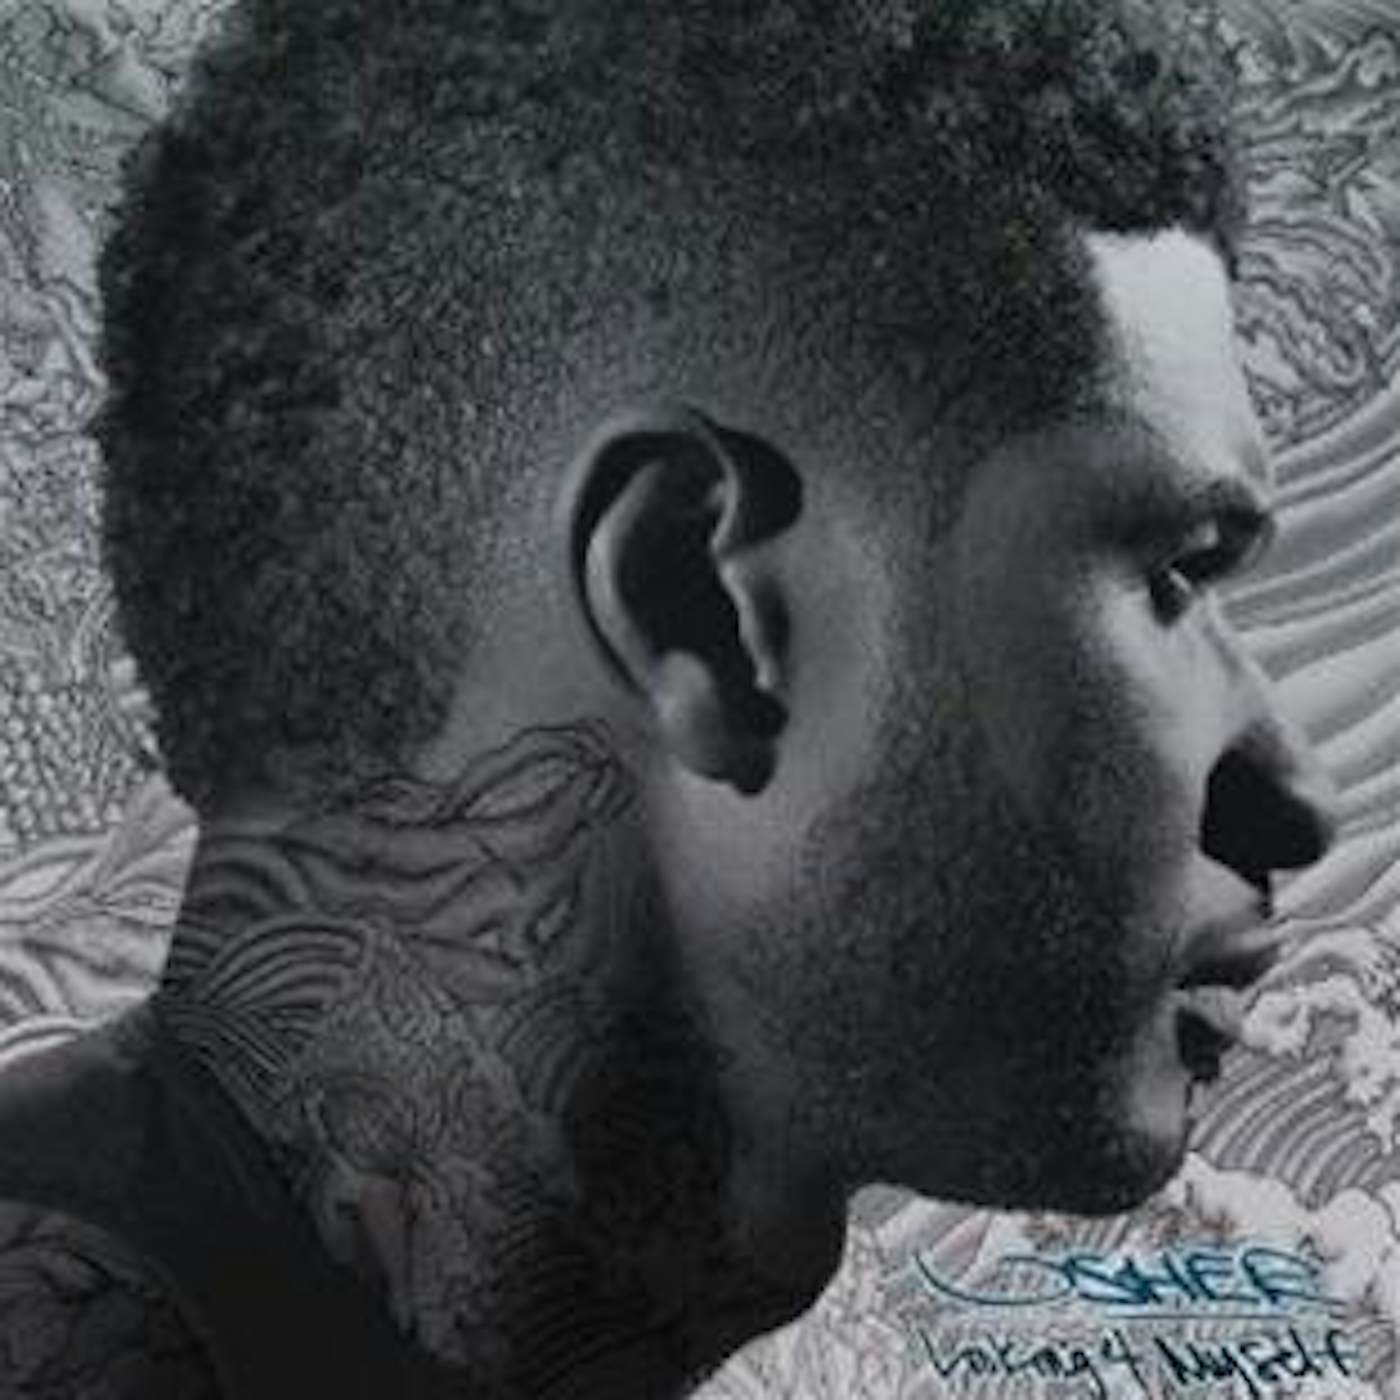 USHER LOOKING FOR MYSELF CD